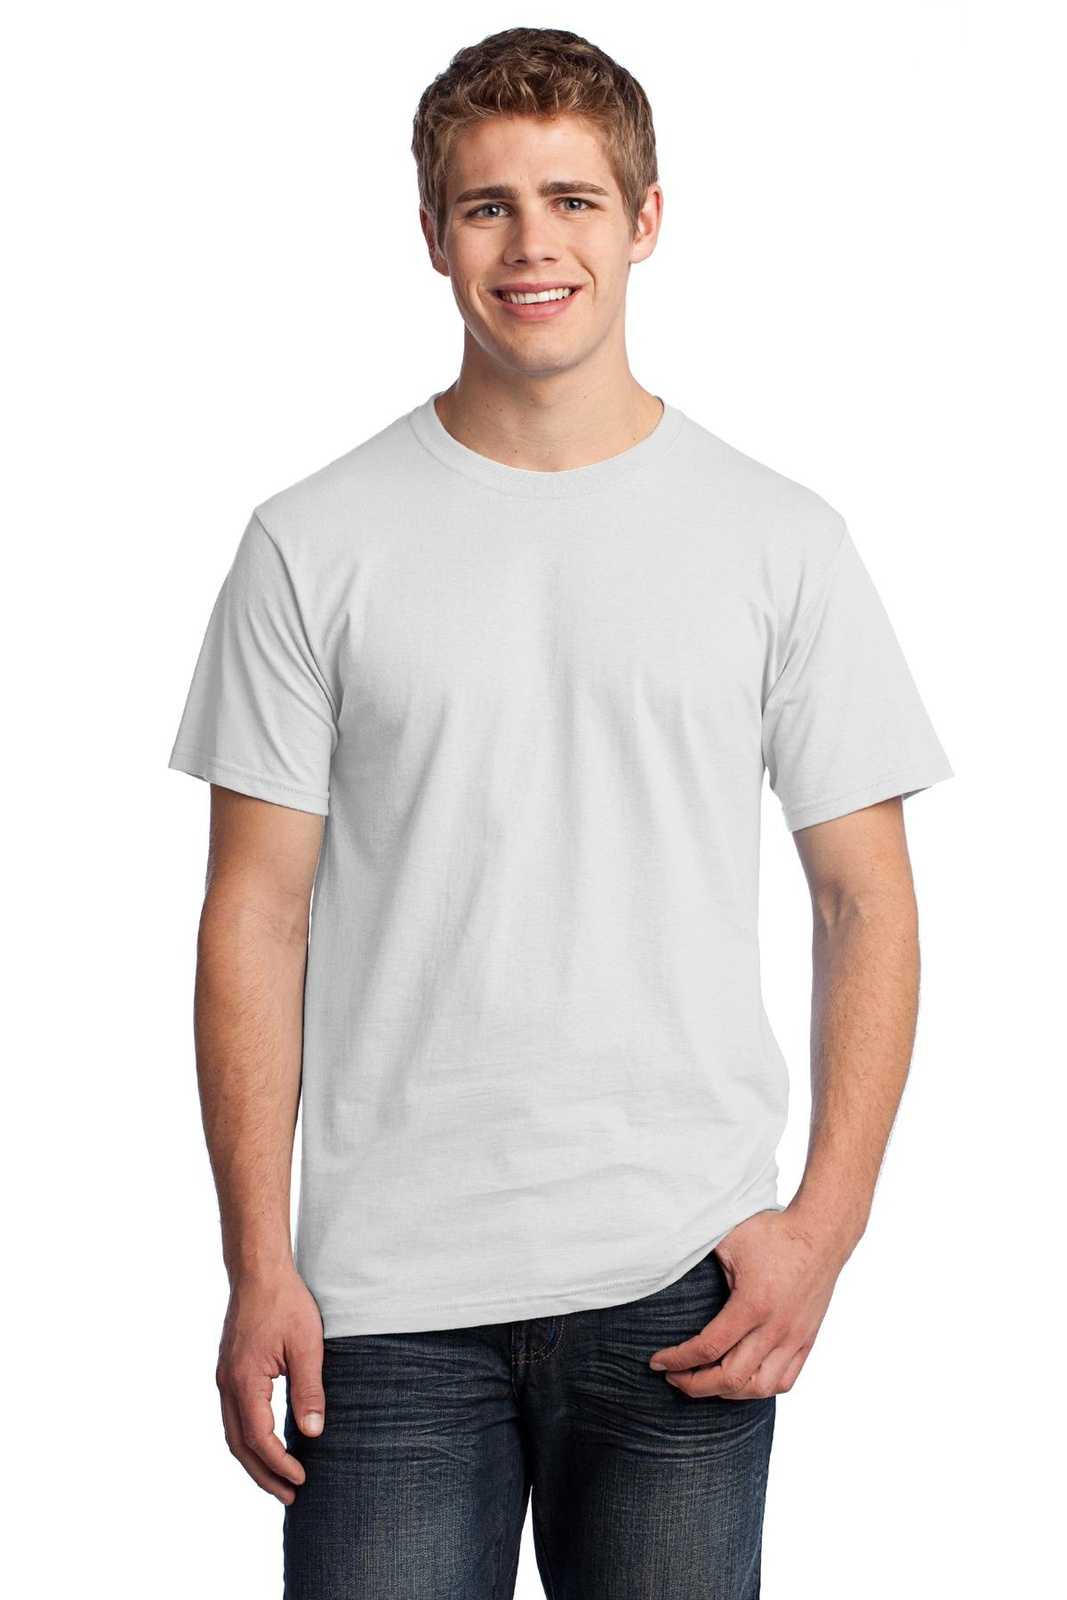 Fruit of the Loom 3930 HD Cotton 100% Cotton T-Shirt - White - HIT a Double